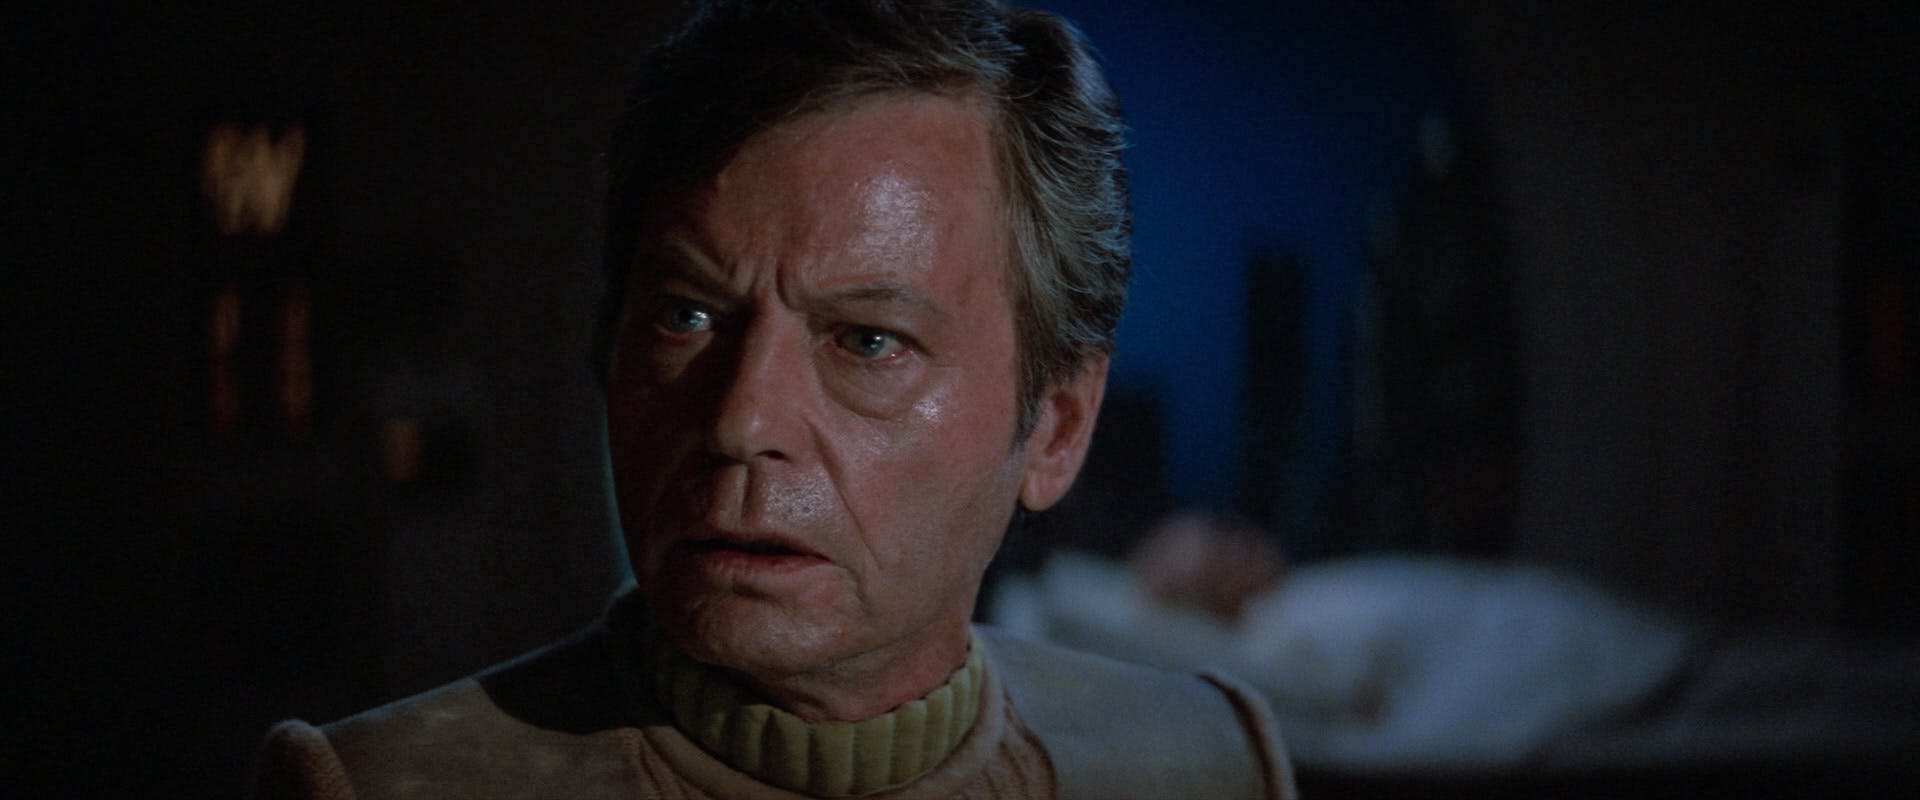 With a vision of his ailing father lying behind him, McCoy's face reflects immense grief that even with all his knowledge, he can't save his father in Star Trek V: The Final Frontier